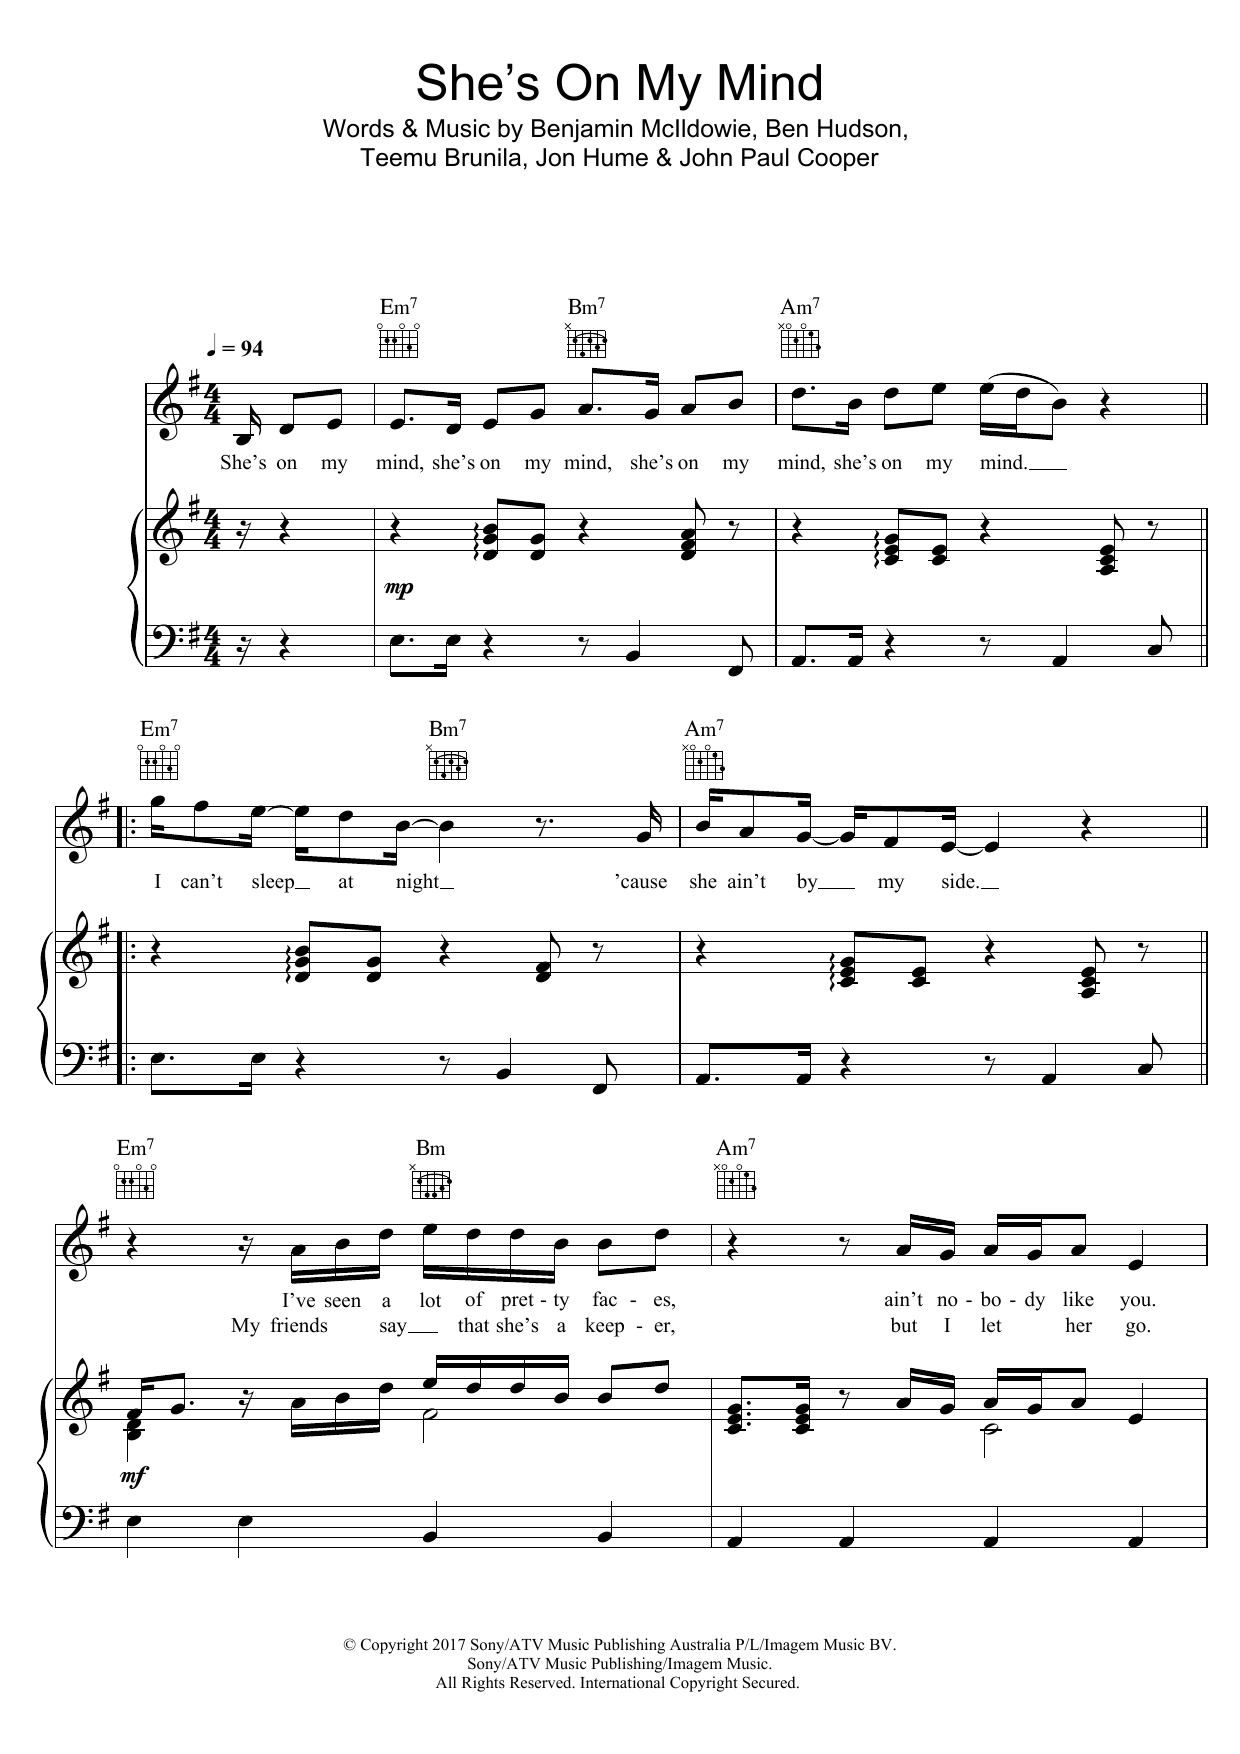 Download JP Cooper She's On My Mind Sheet Music